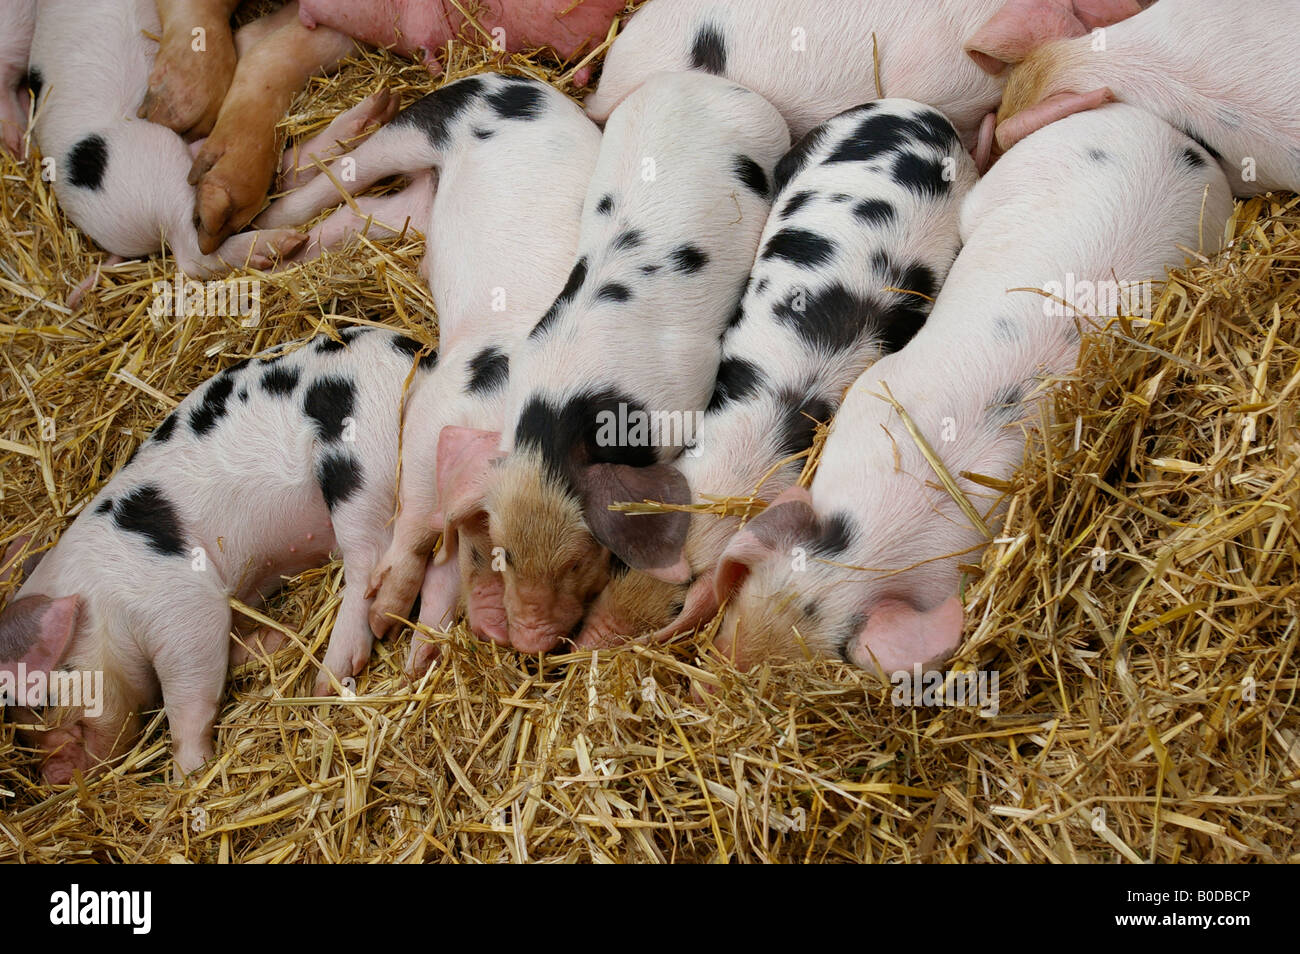 piglet's in pig sty Stock Photo